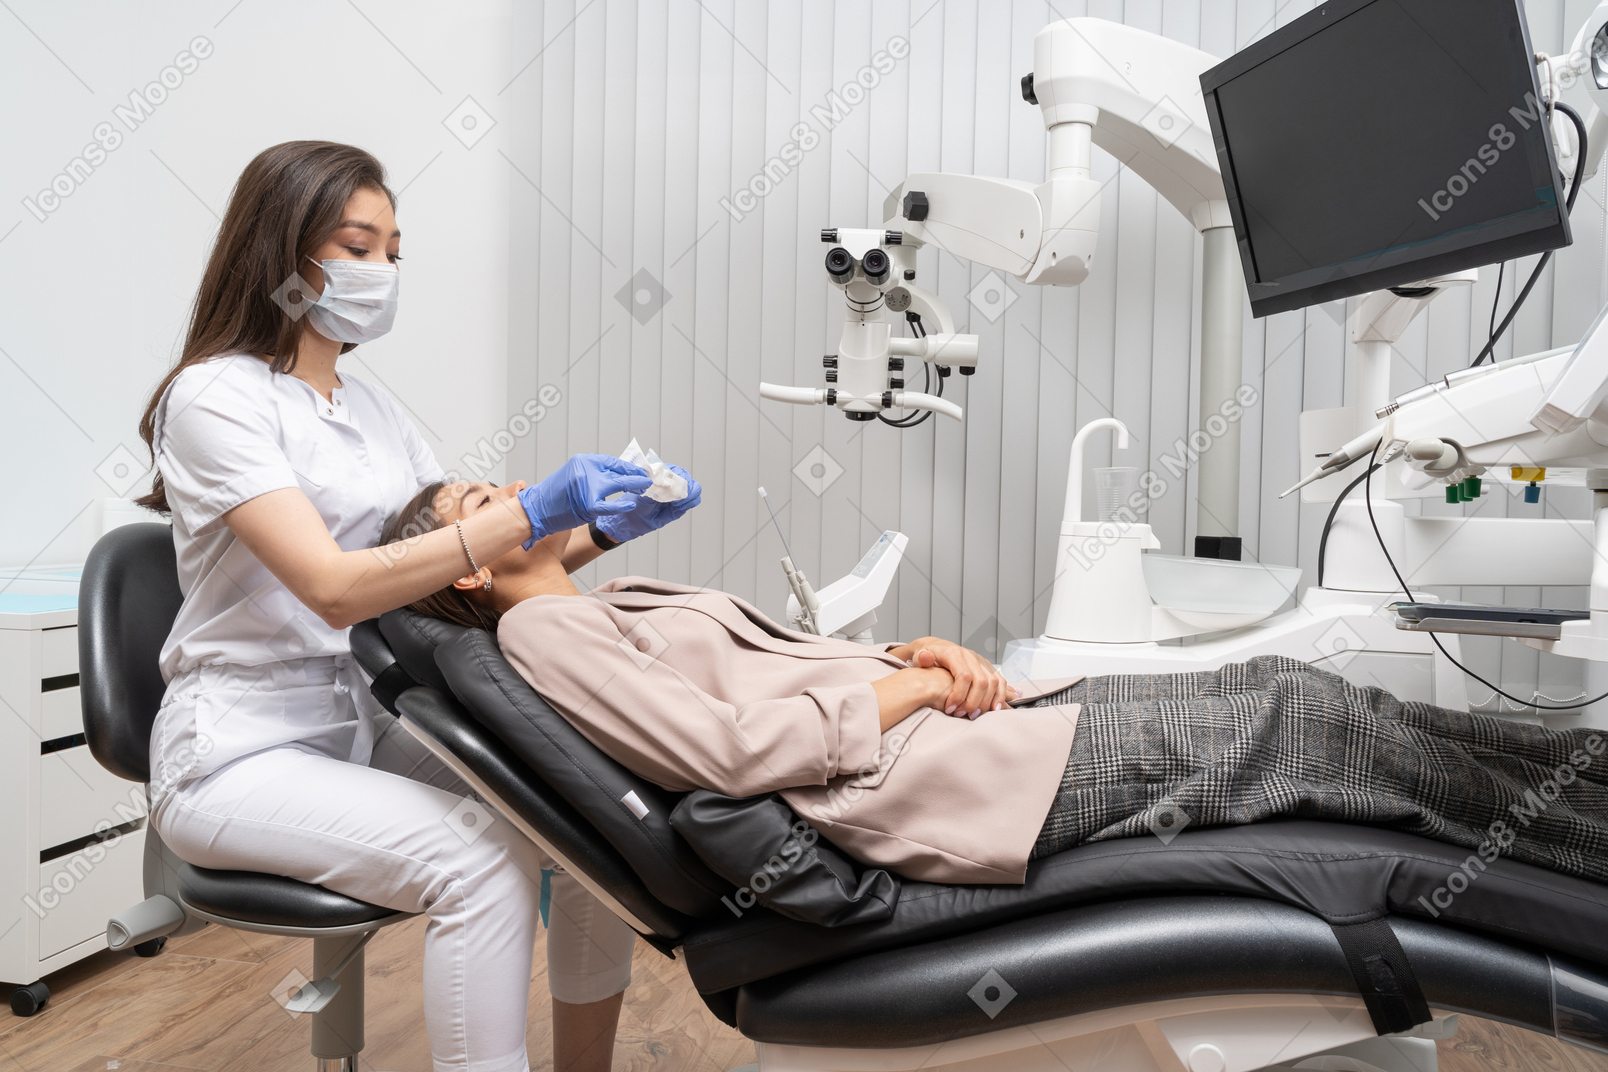 Full-length of a female dentist examining her patient in a hospital cabinet and holding a napkin